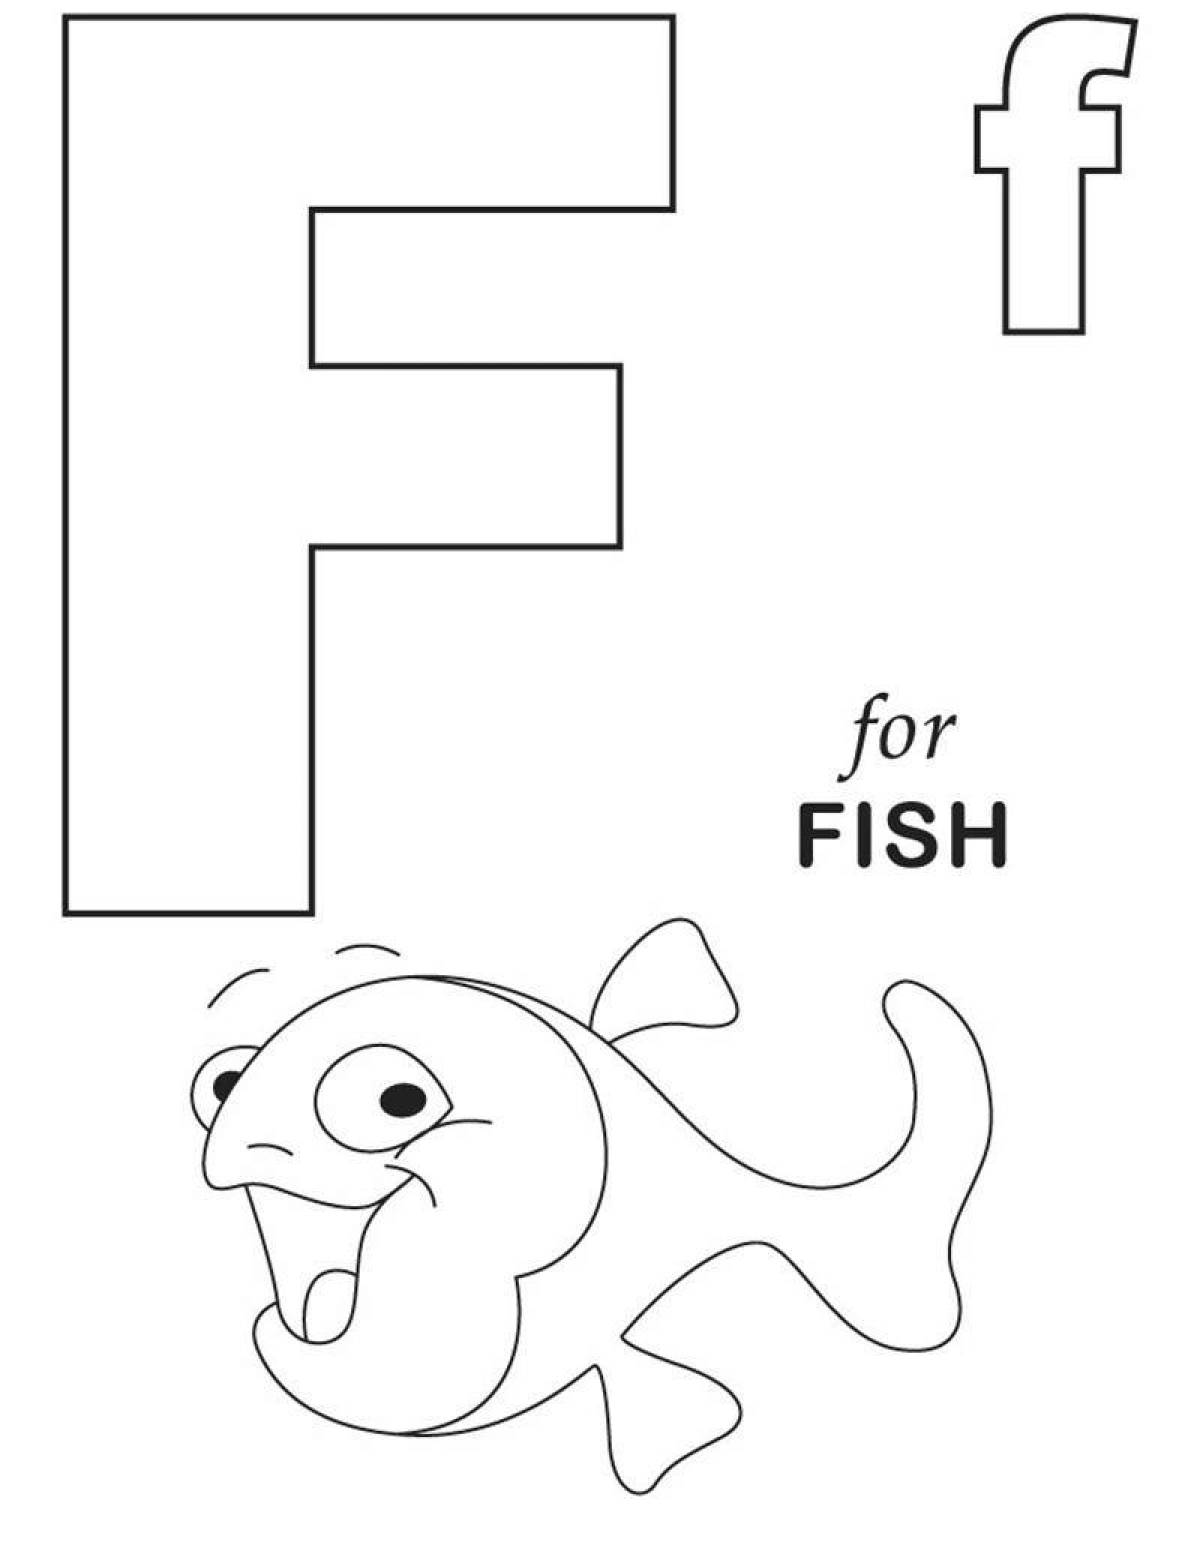 Coloring page playful english letter f